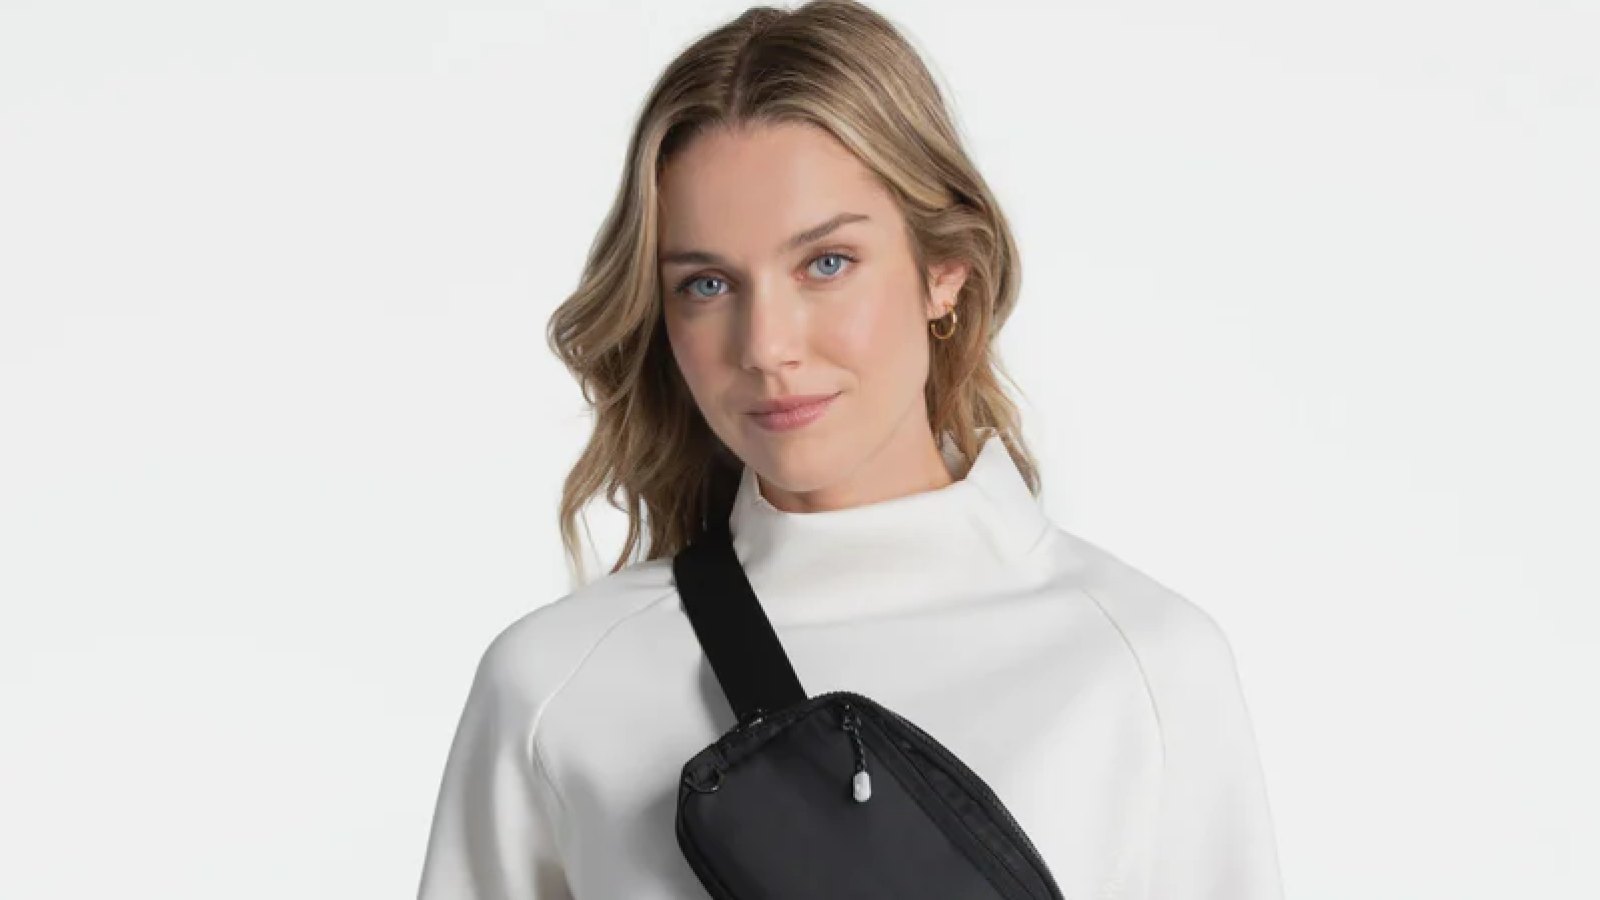 I Love This Belt Bag More Than the Cult-Favorite Lululemon Style